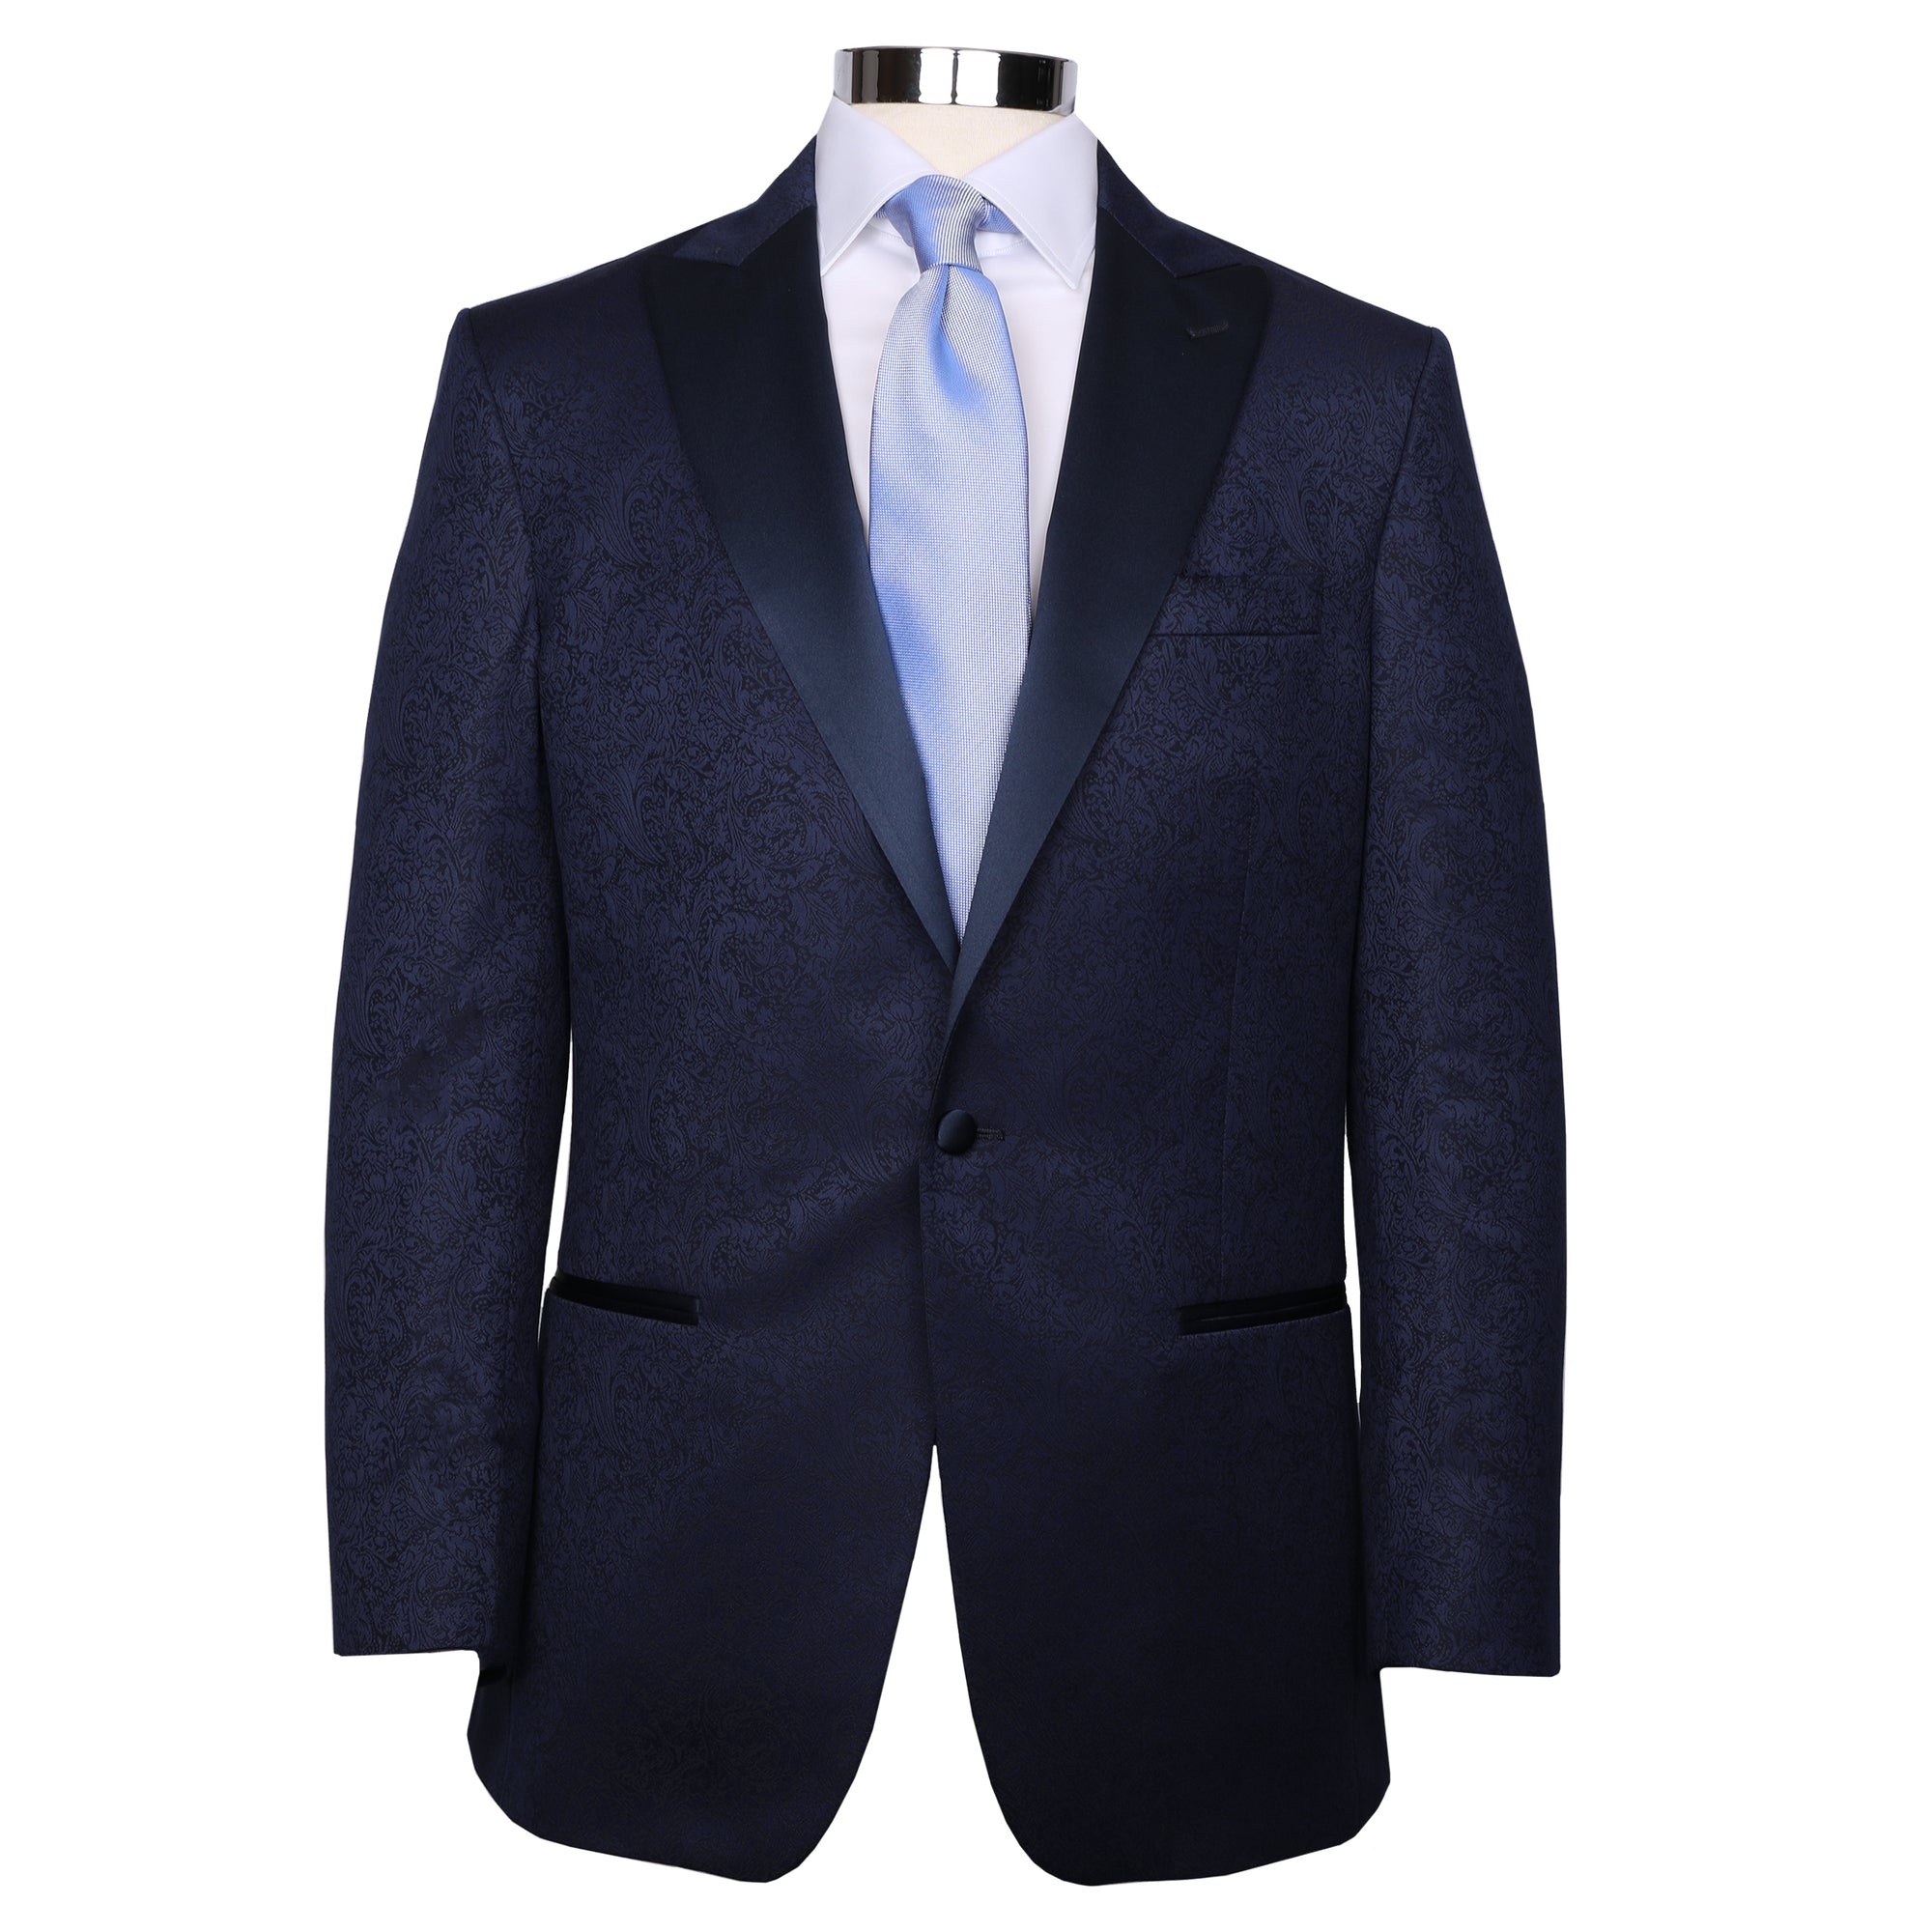 Look sharp in this navy blue Audubon dinner jacket! Crafted in a classic silhouette with a textured finish, this lightweight beauty is as stunning as it is stylish. Add a touch of glamour to your formal wardrobe.   60% Polyester / 20% Wool / 20% Viscose • Audubon Classic Fit • Natural Shoulder • One Button Closure • Satin Trim Besom Pockets • Satin Covered Buttons • Fully Lined • 2 Side Vents • Satin Peak Lapel • Dry Clean Only